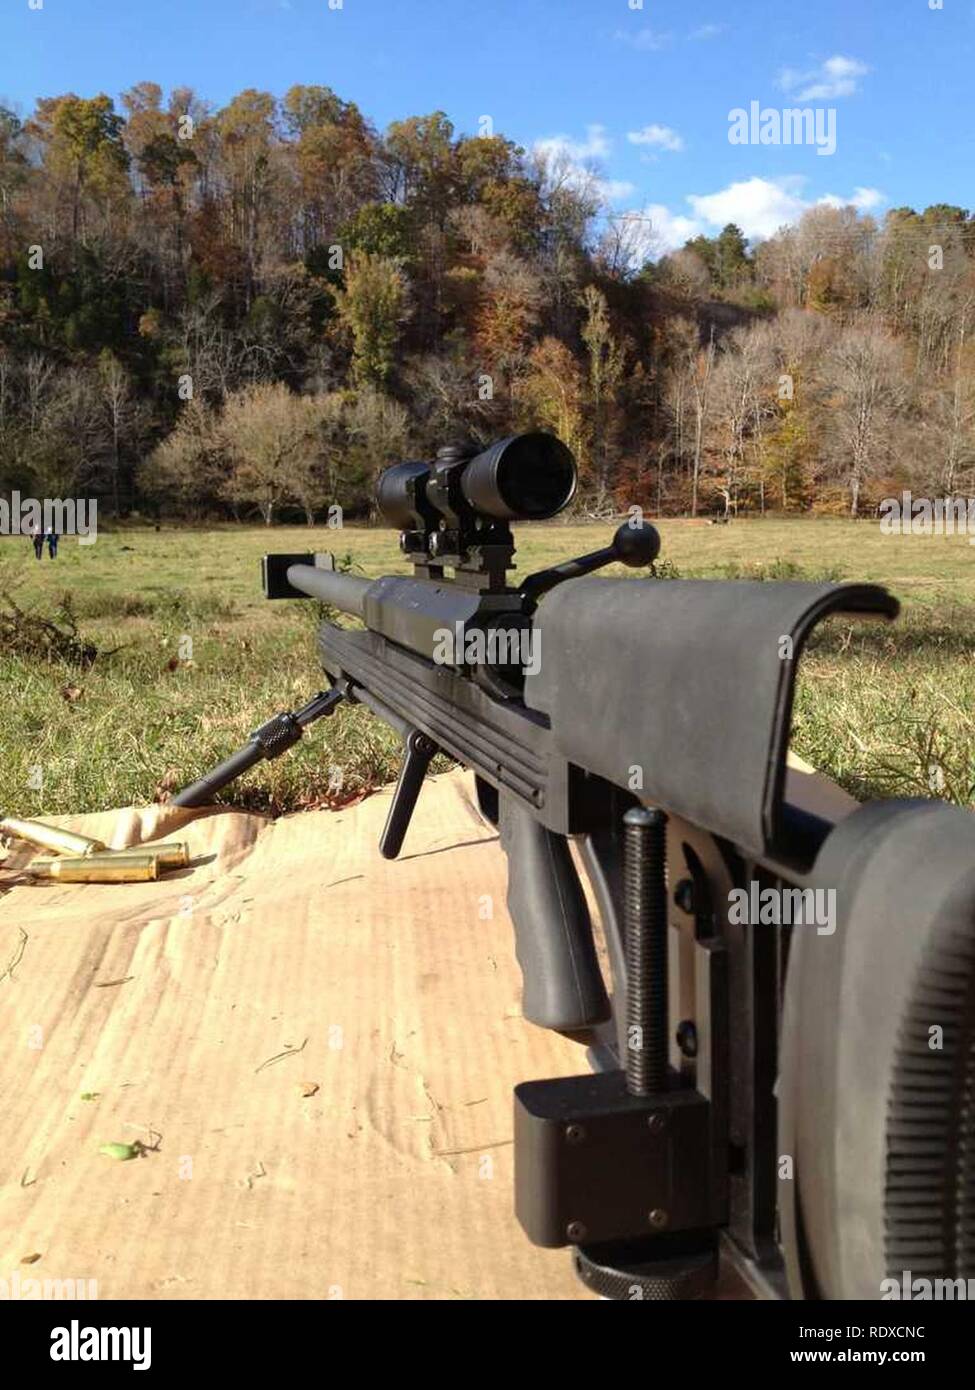 50 Bmg High Resolution Stock Photography And Images Alamy